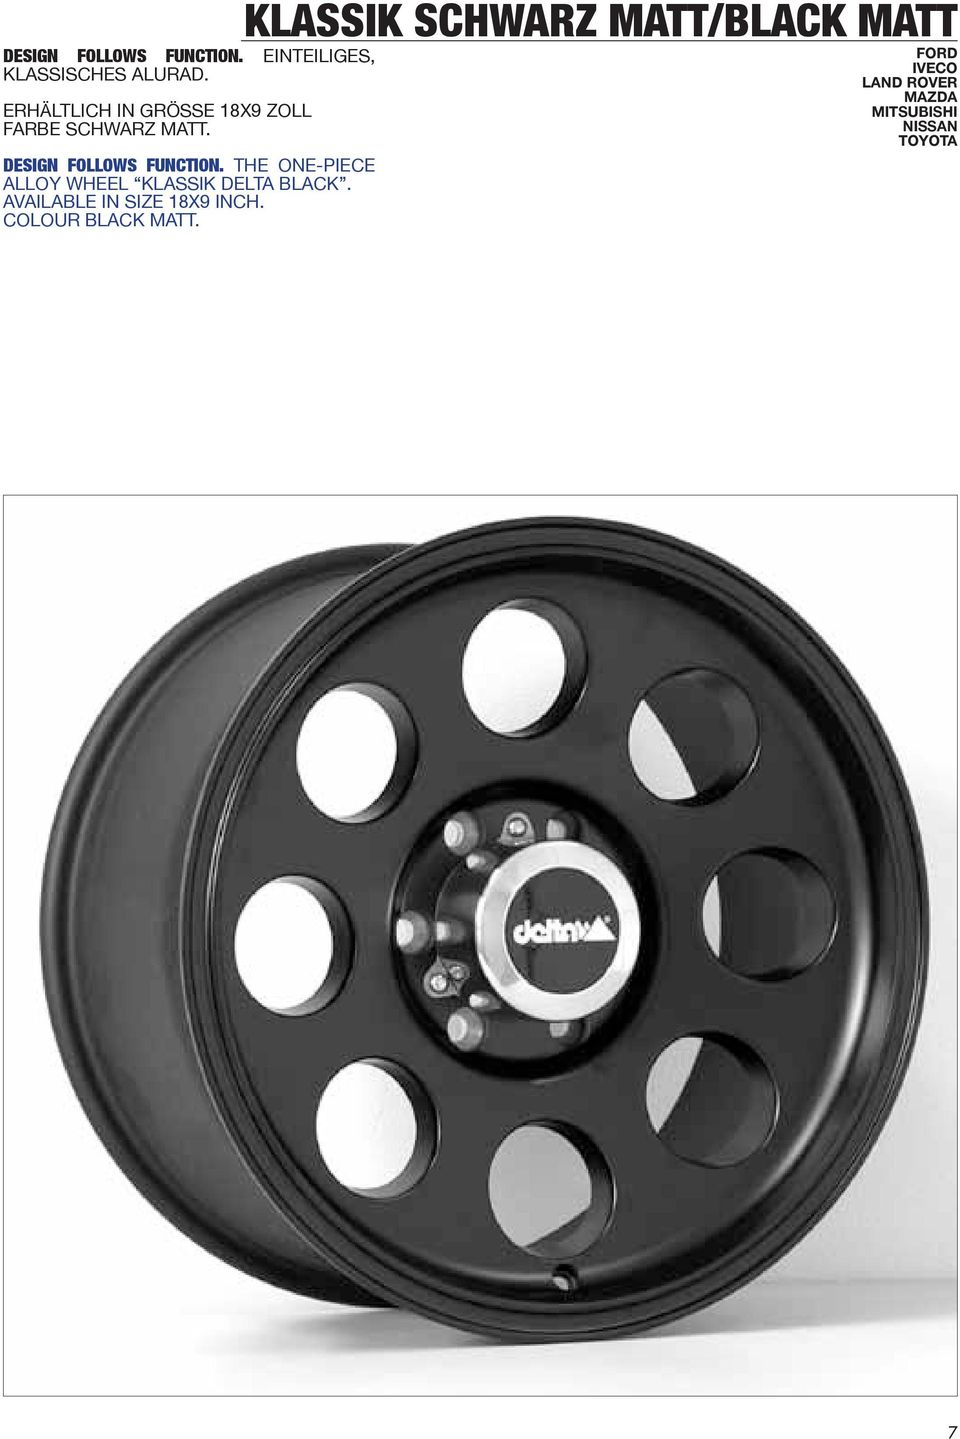 The One-piece Alloy wheel klassik delta BLACK. Available in size 18x9 inch.